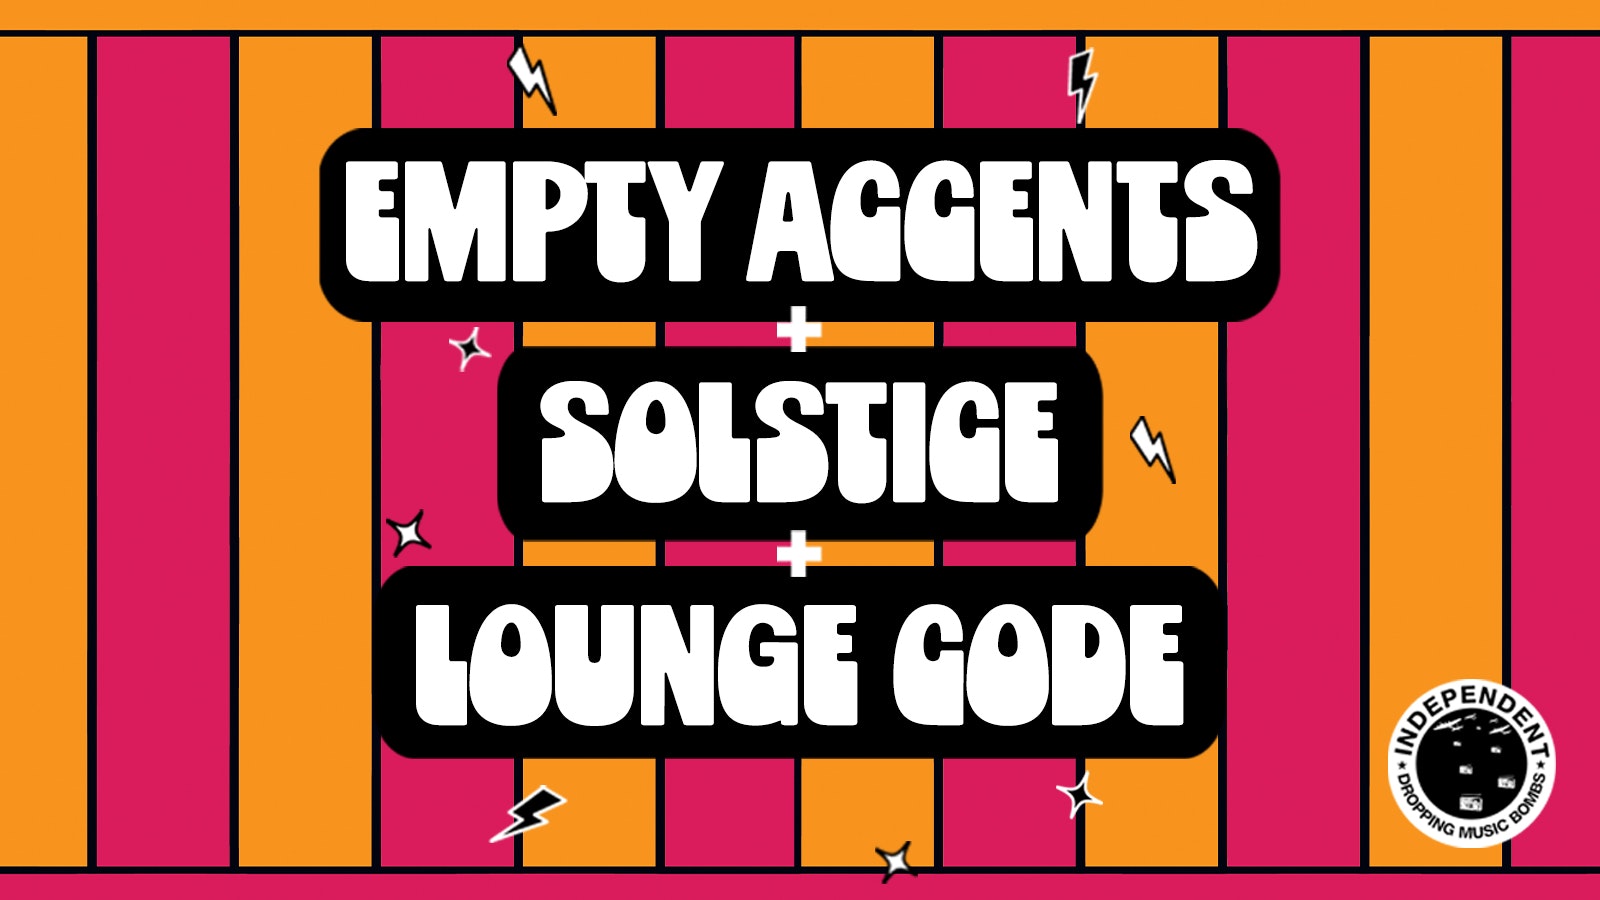 Empty Accents + Solstice + Lounge Code